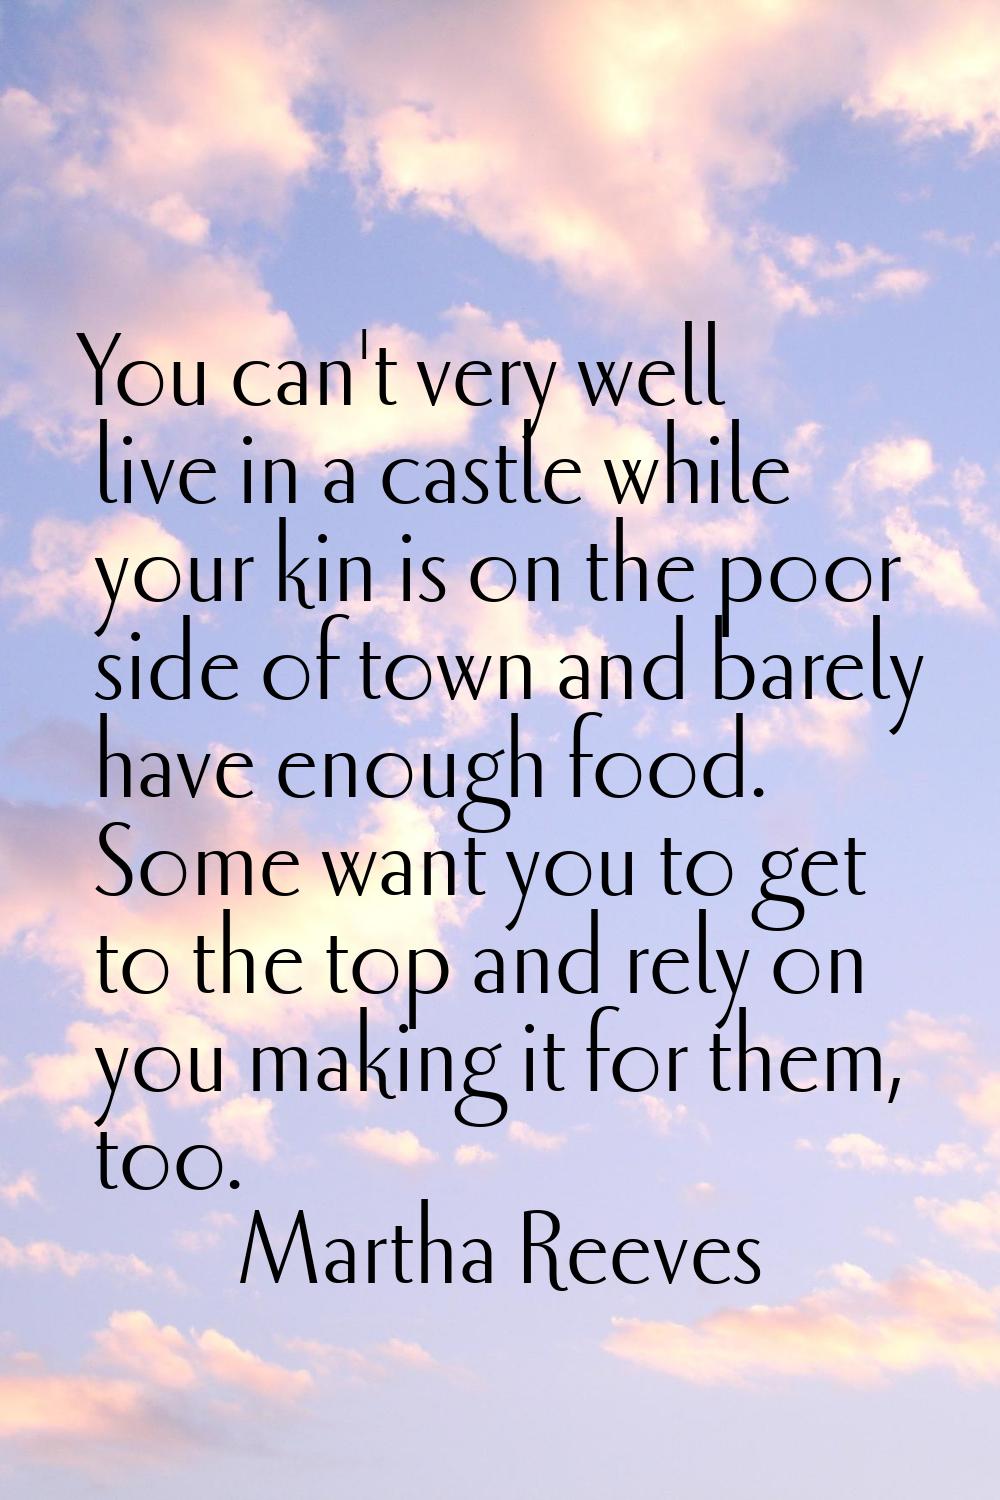 You can't very well live in a castle while your kin is on the poor side of town and barely have eno